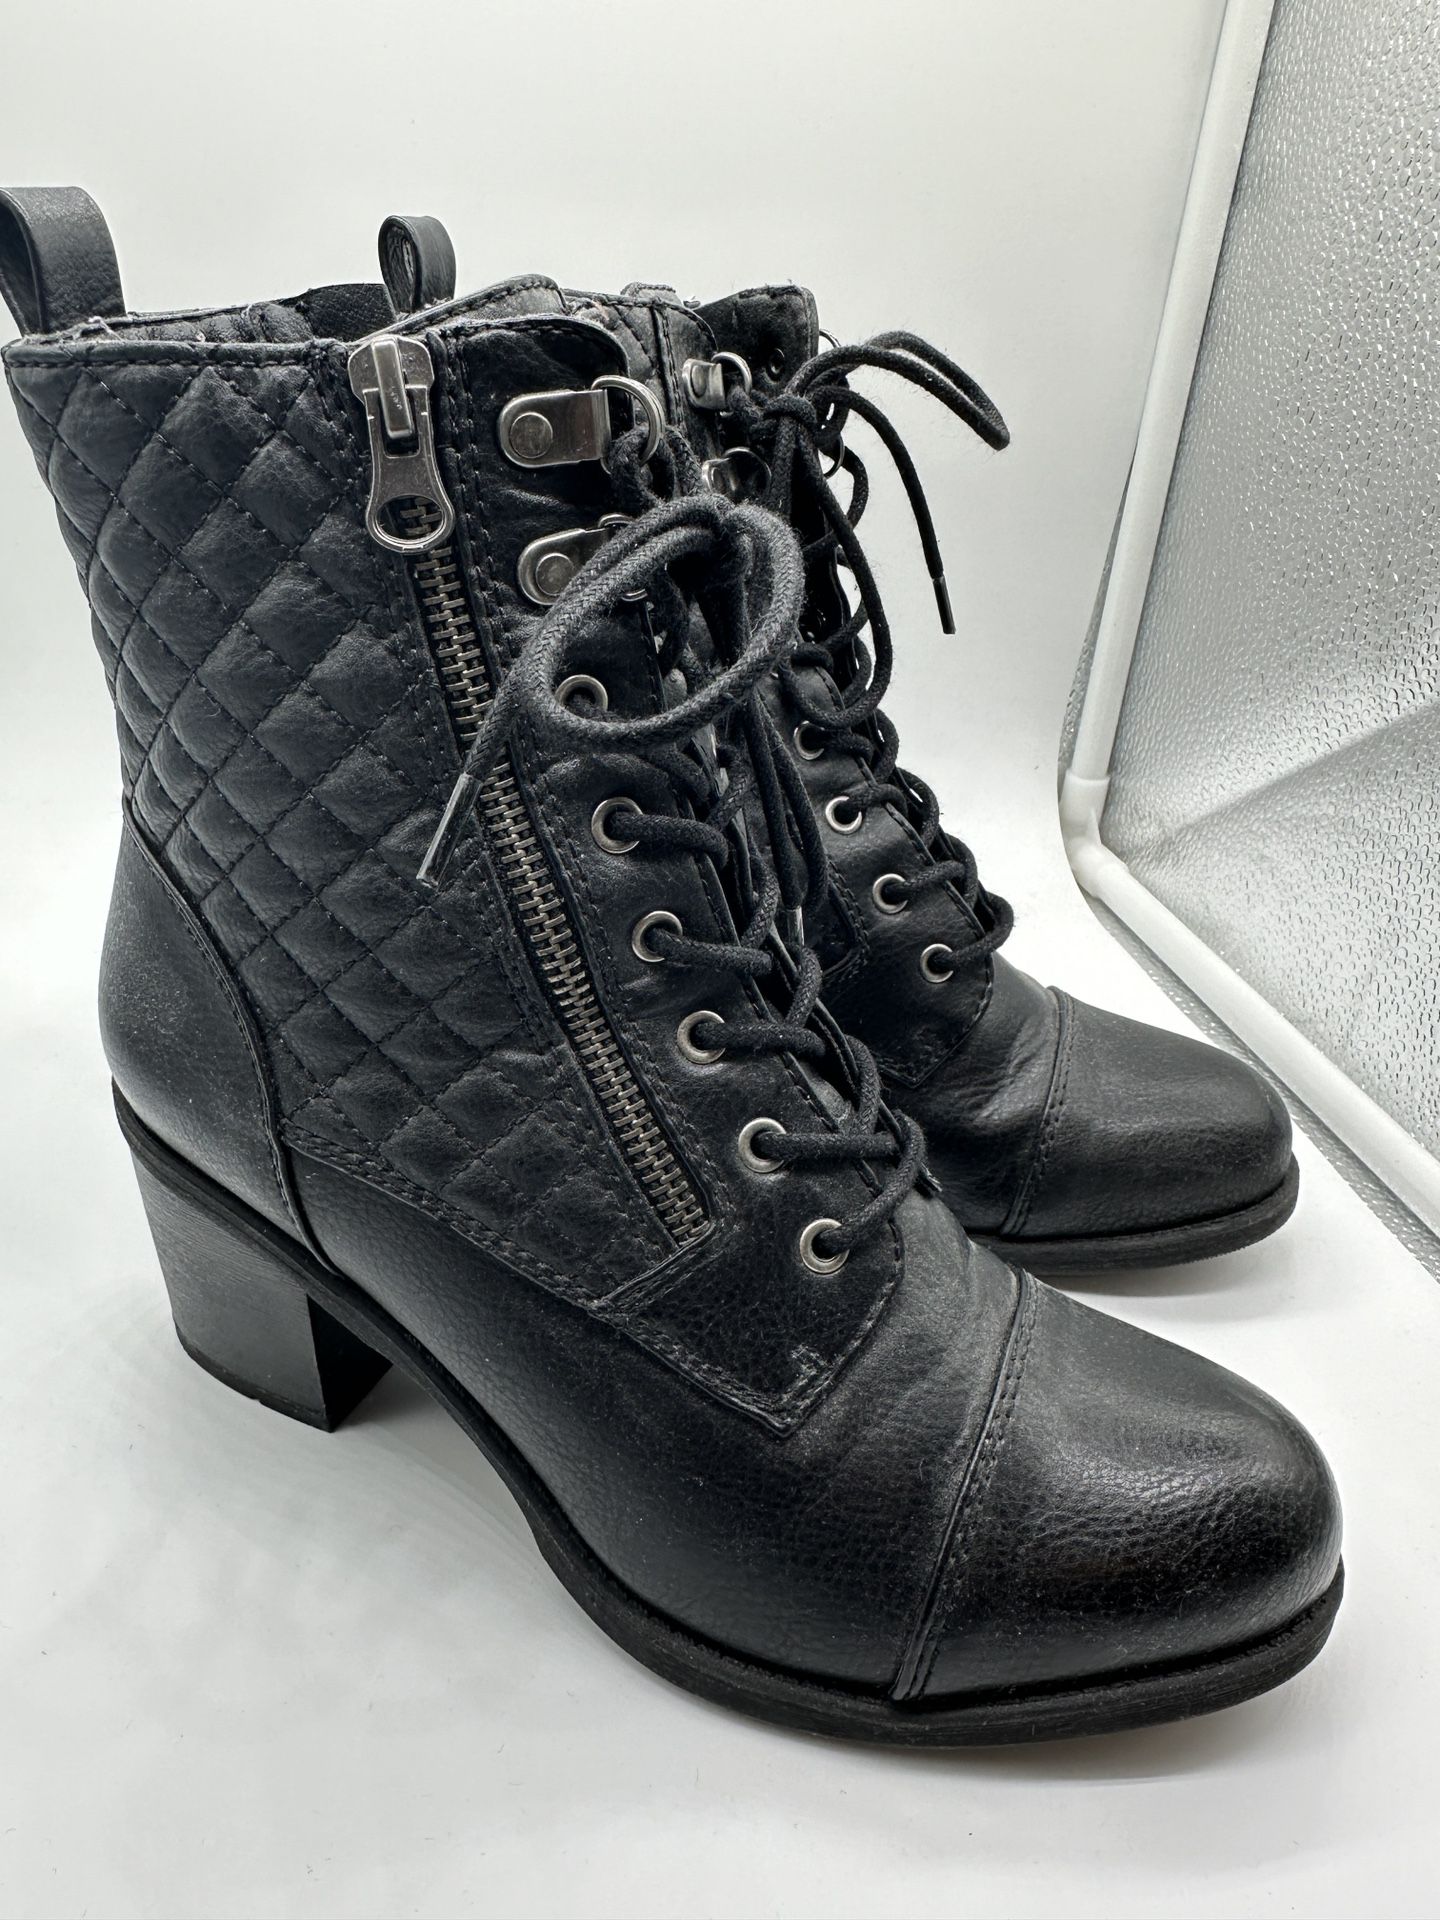 FREE WOMEN’S BOOTS